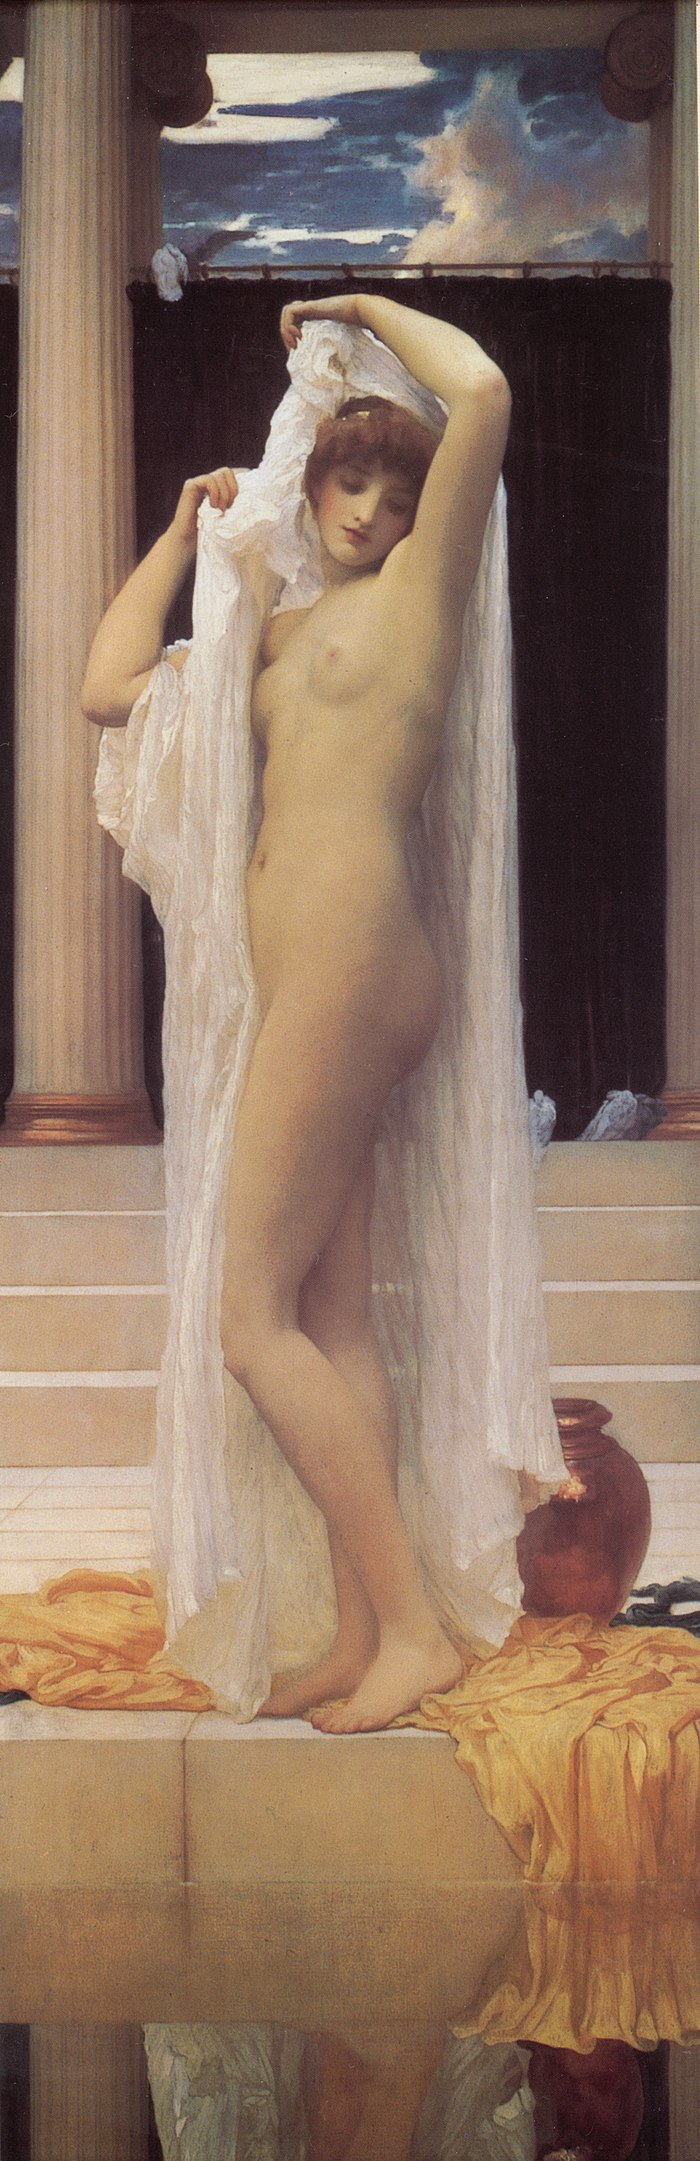 "Bath Of Psyche," by Frederic Leighton.